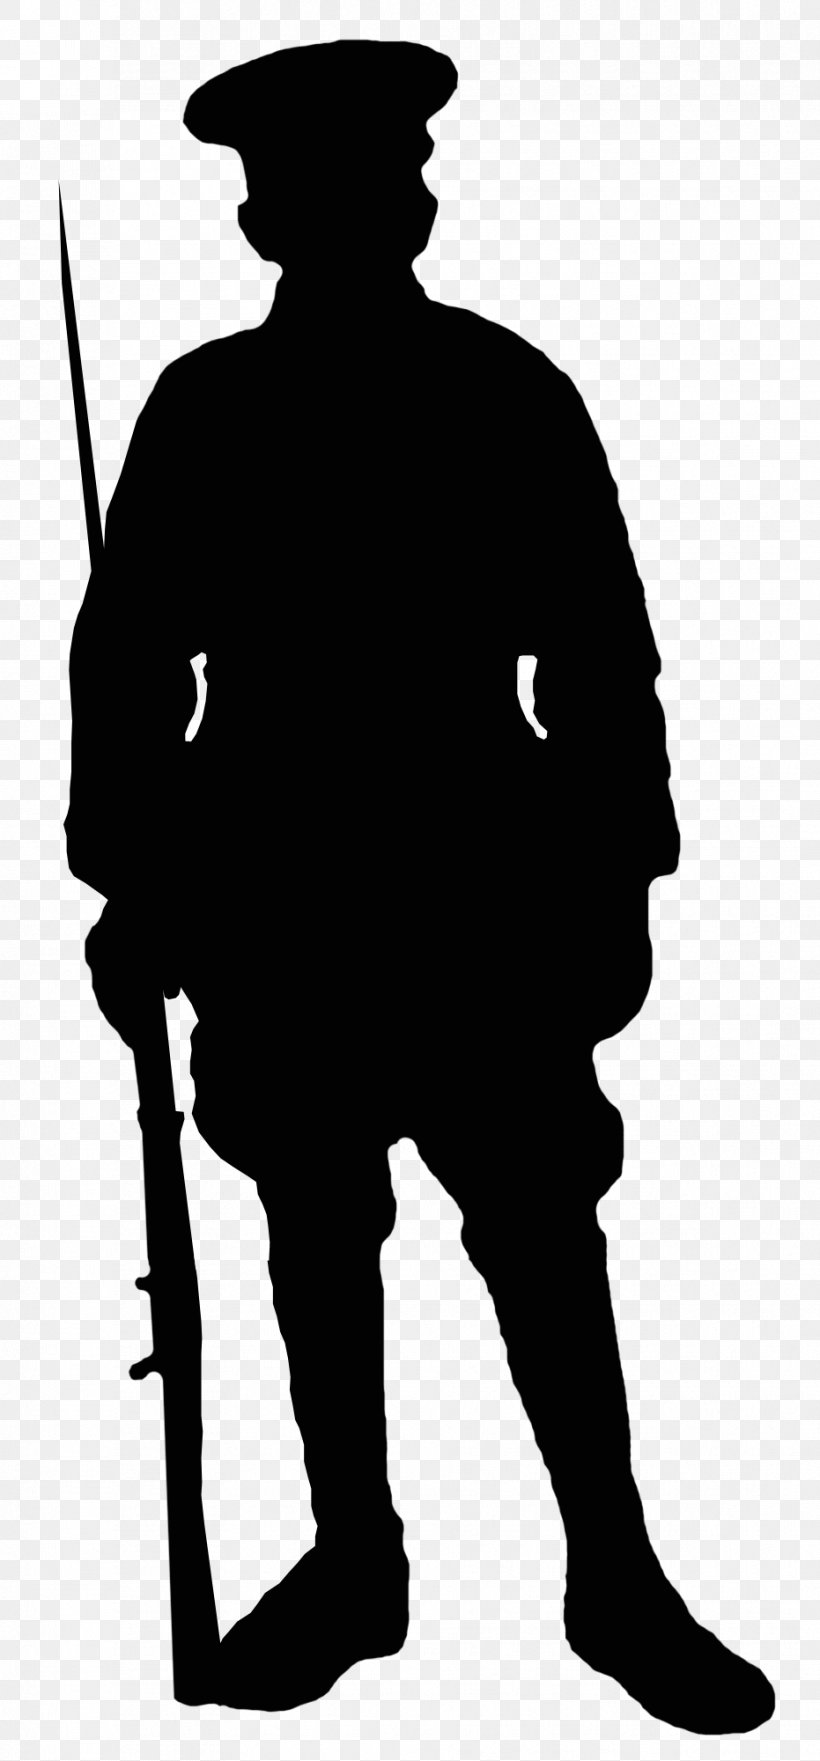 First World War Silhouette Soldier Military, PNG, 931x2000px, First World War, Army, Black, Black And White, Fictional Character Download Free